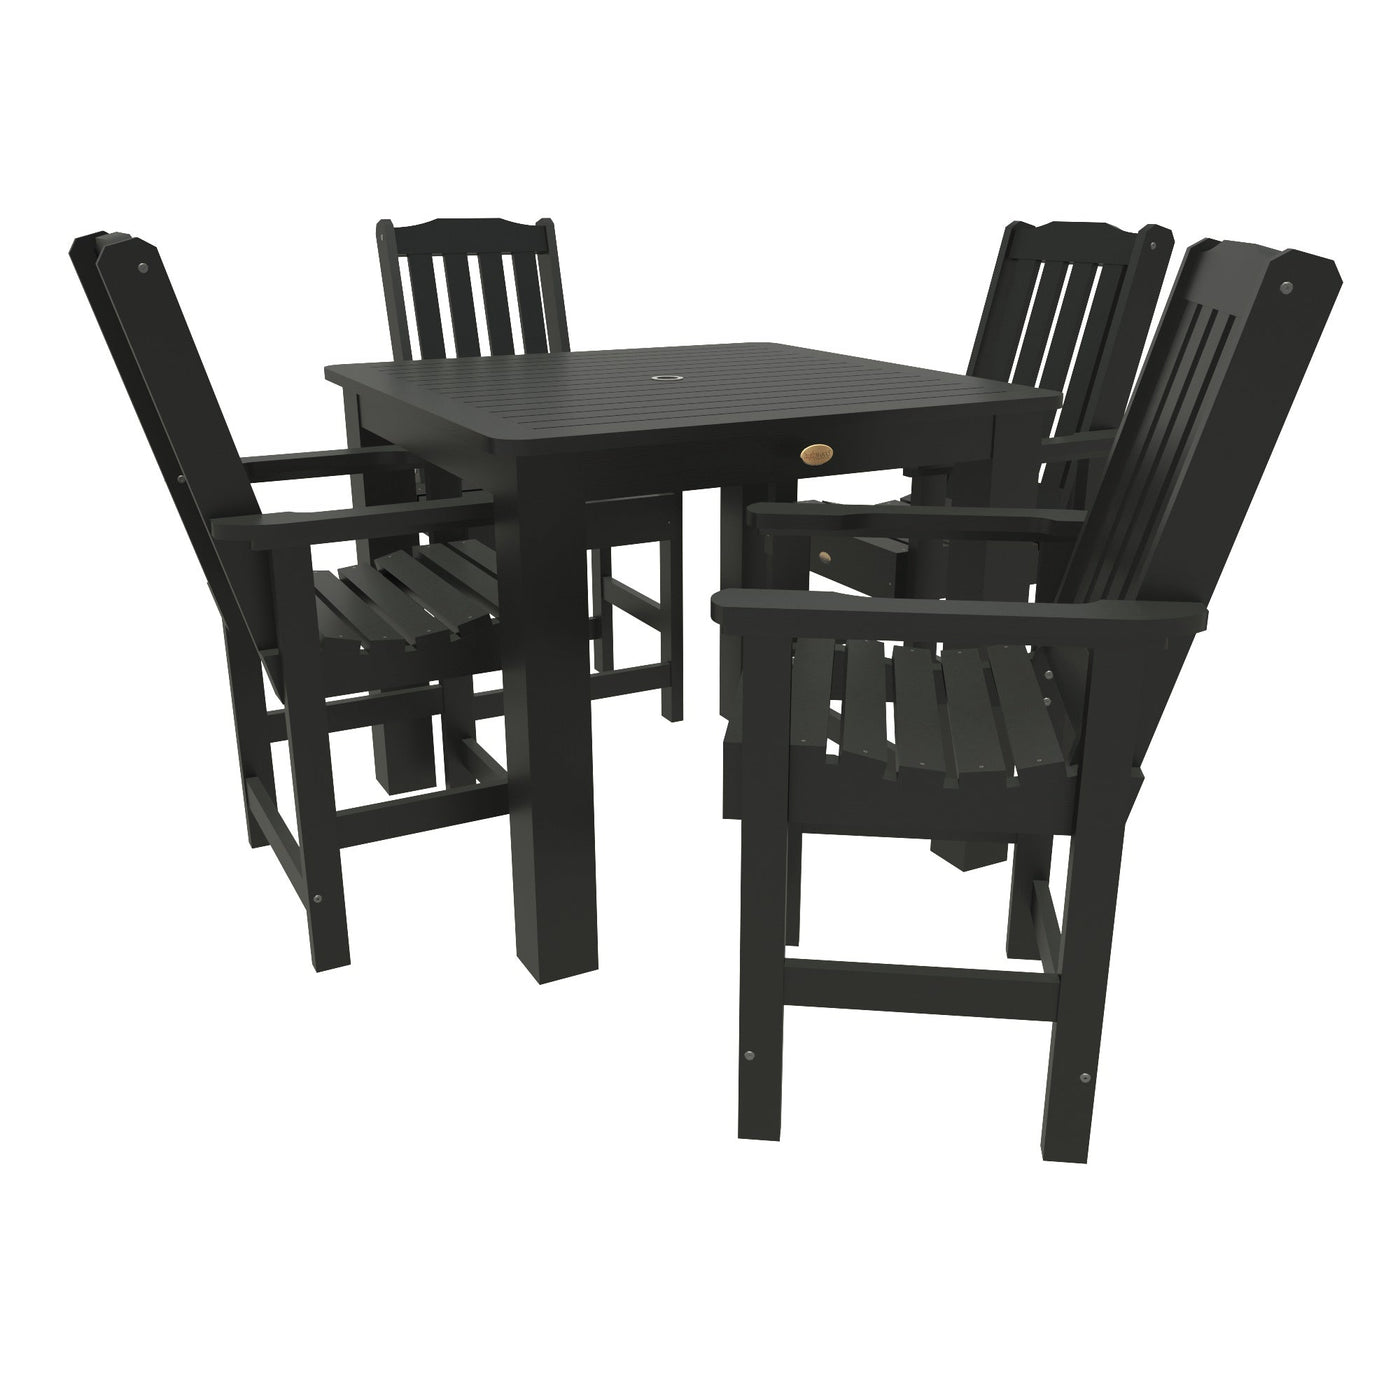 Lehigh 5pc Square Dining Set 42in x 42in - Counter Height Dining Highwood USA Black 